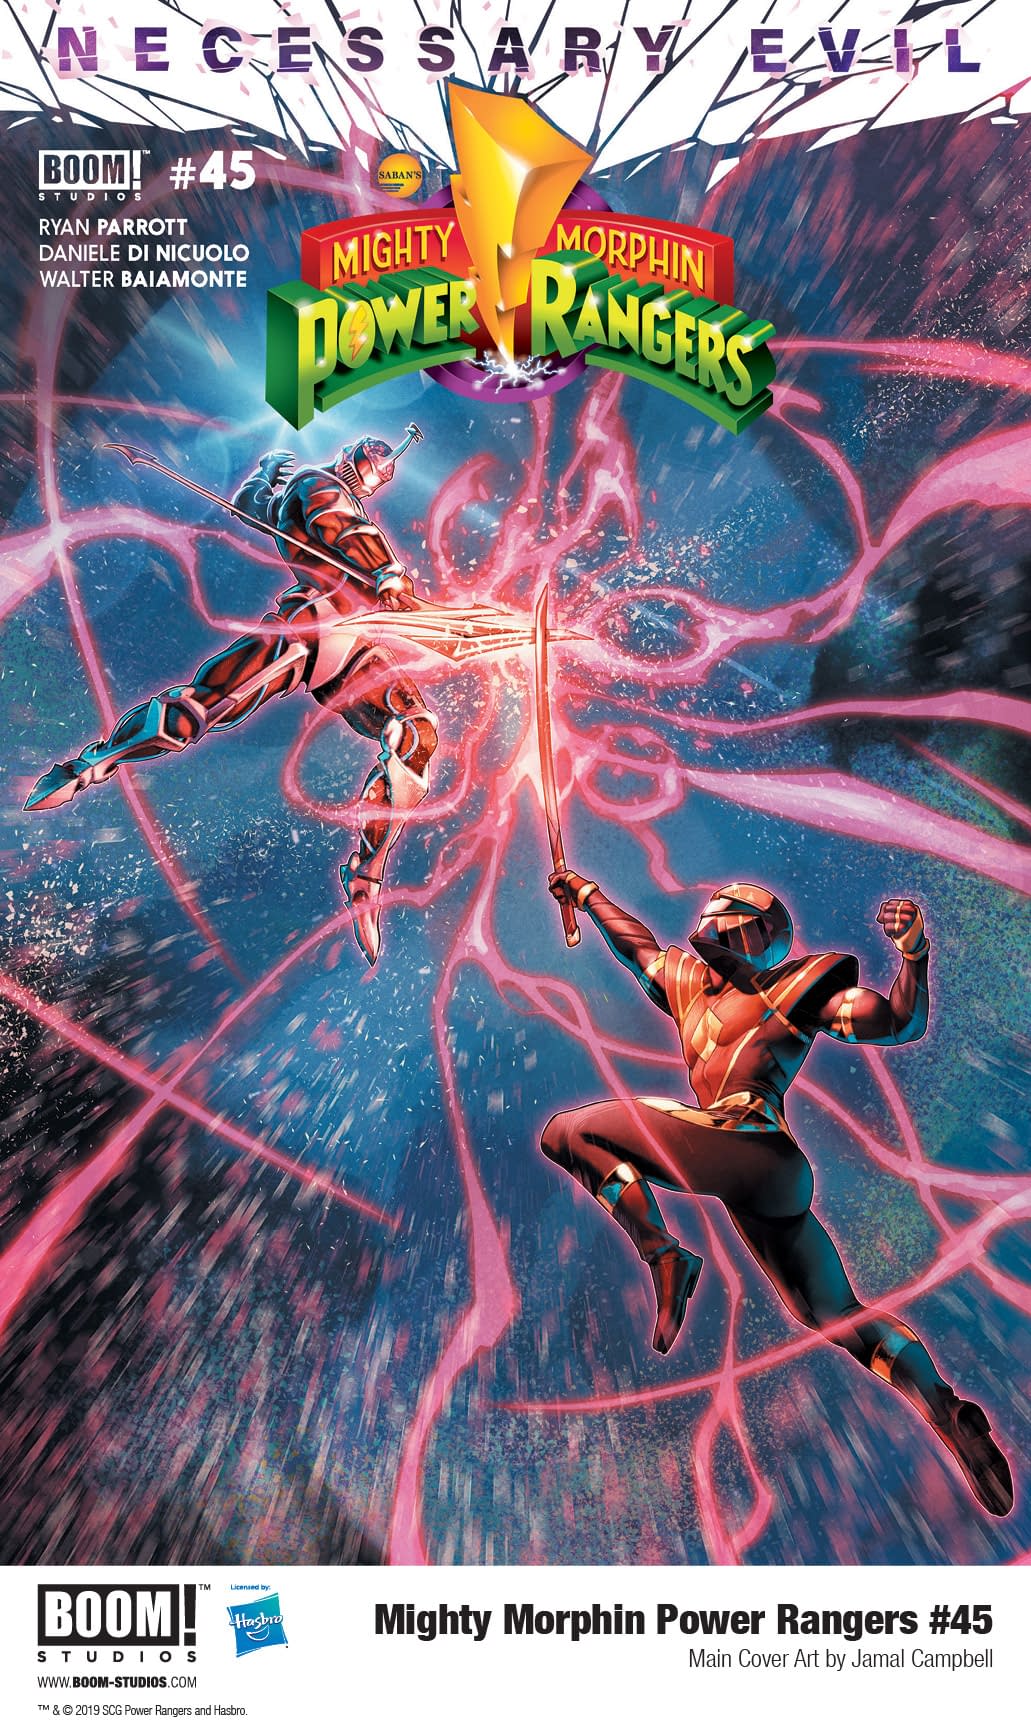 Power Rangers to Be Changed Forever in Shocking Mighty Morphin Power Rangers #45 [Preview]